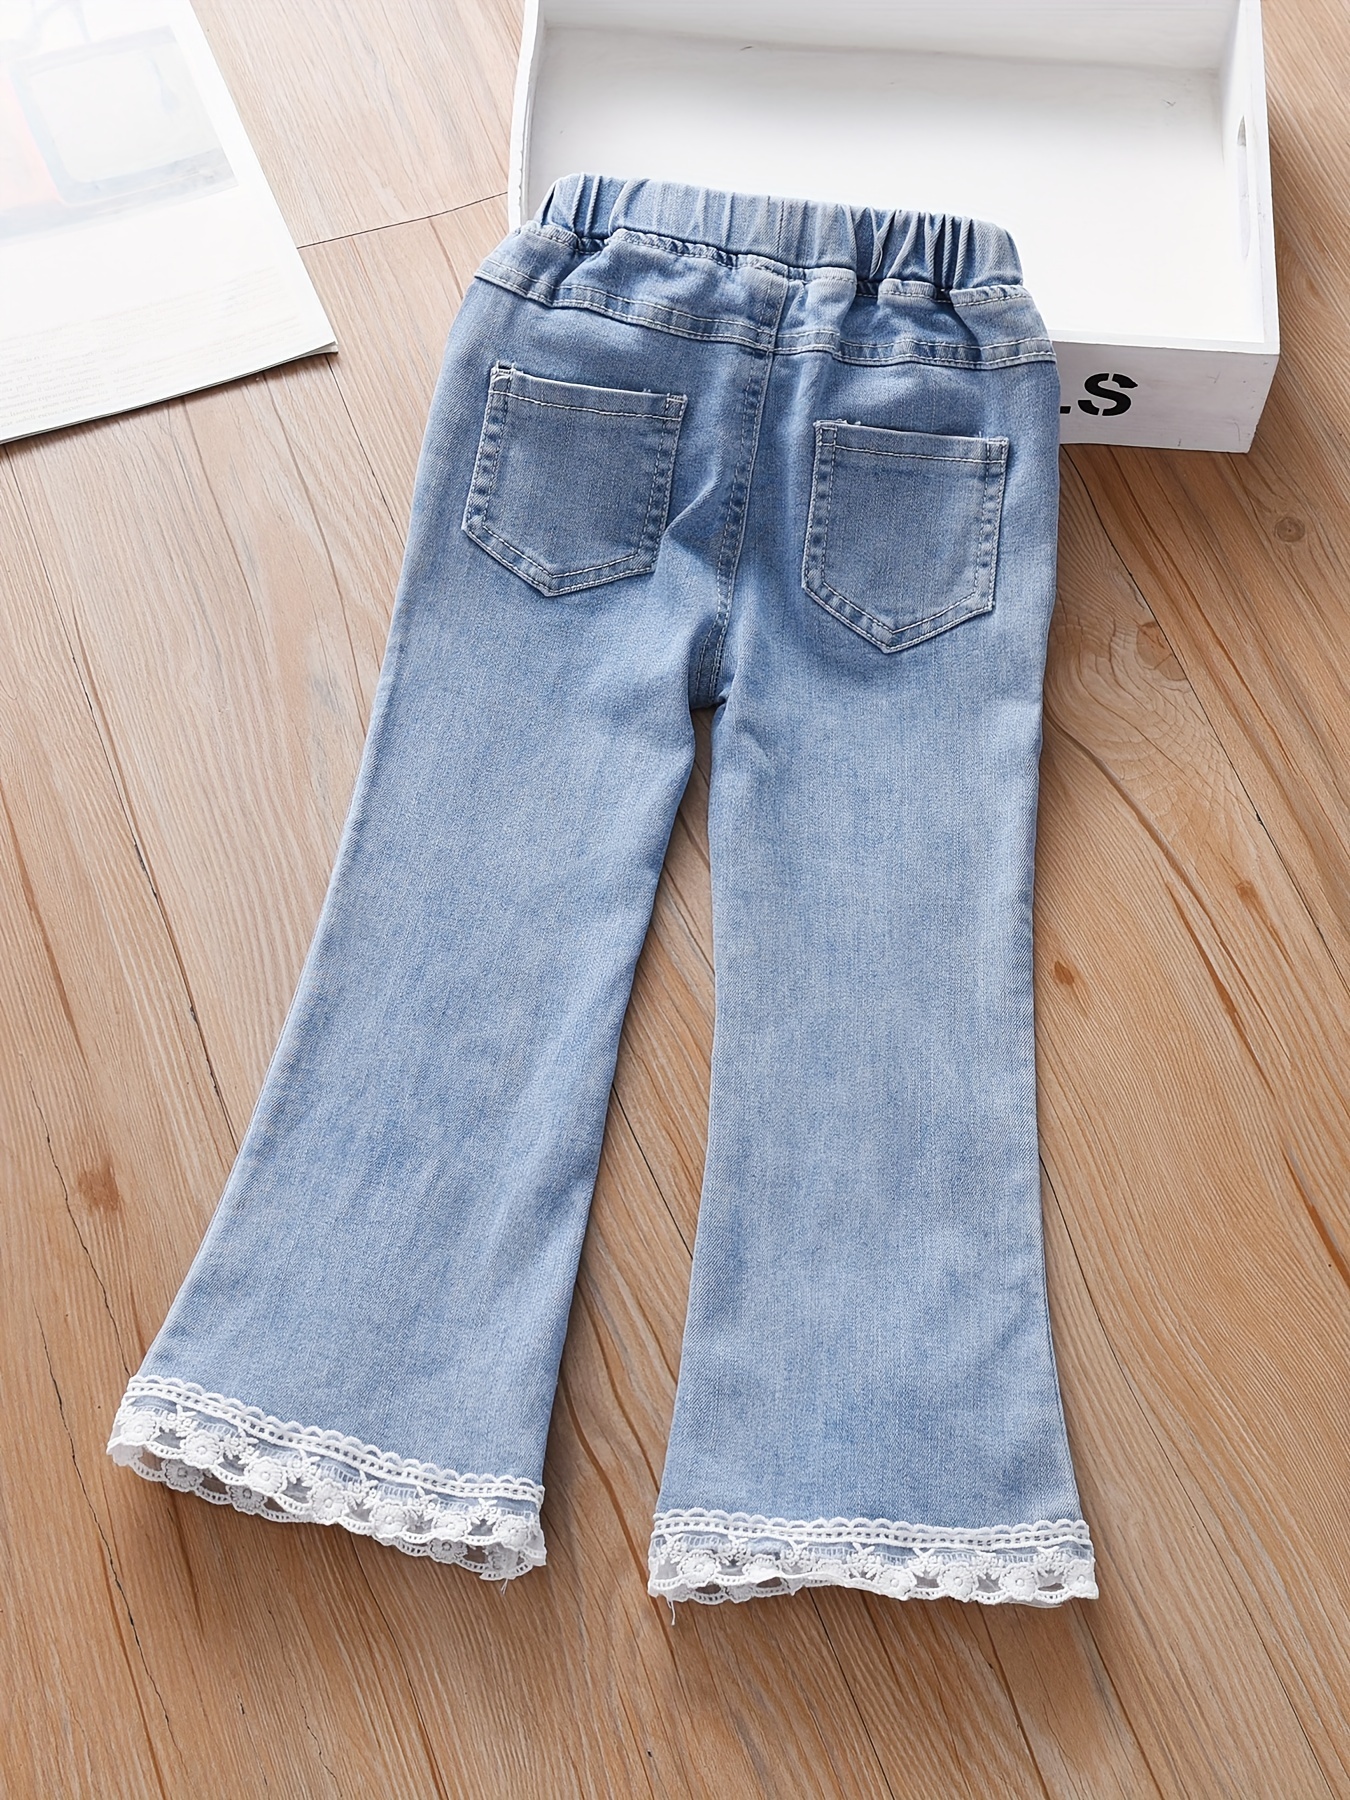 Women Flare Jeans Spring Autumn Fashion Casual Wide Leg Bell